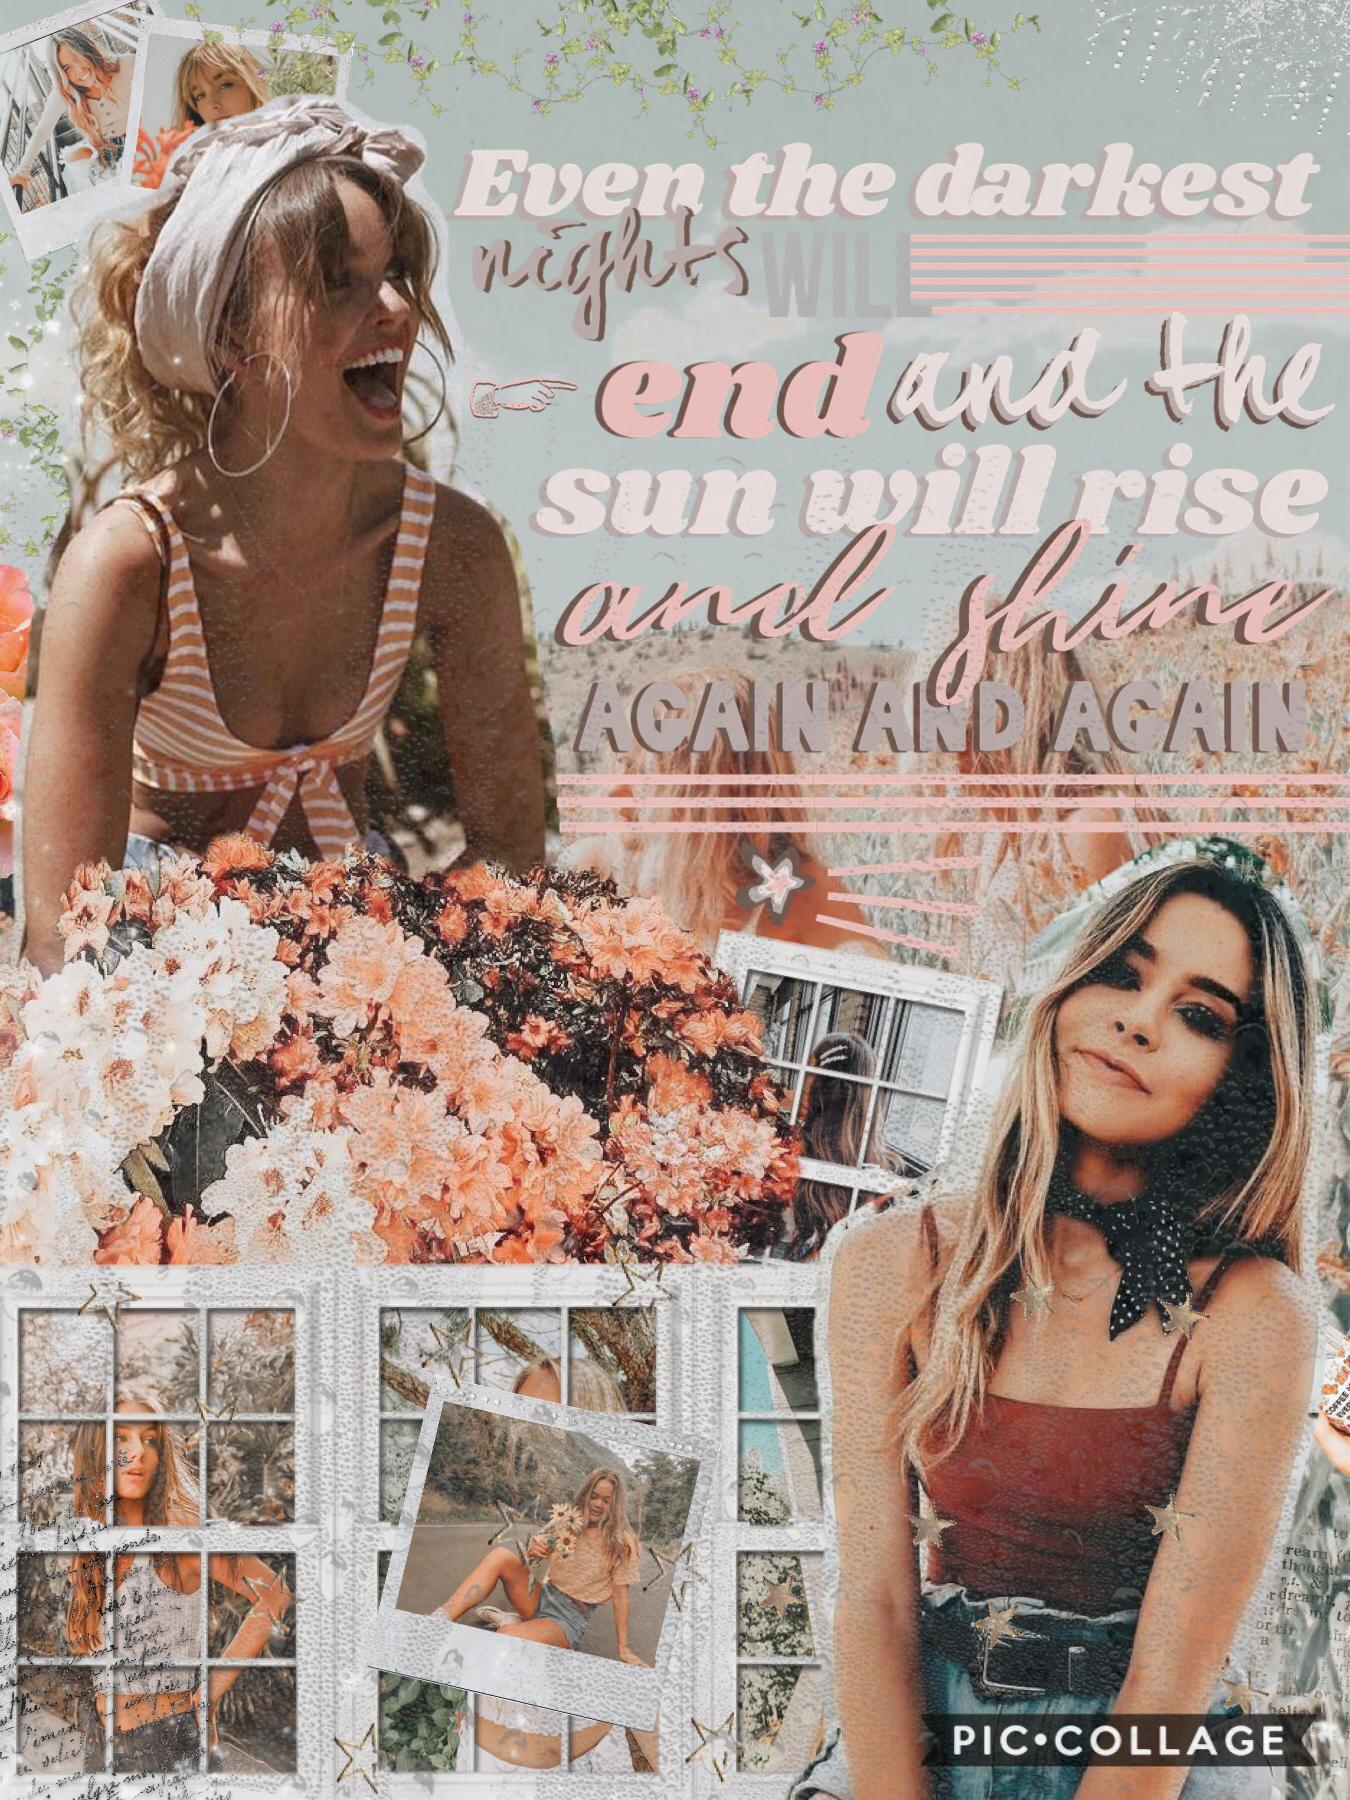 🌺3/9/20🌺
Hey! I felt it wasn’t necessary to post yesterday since I posted 3 times on the 1st. I tried my own bg style, so let me know what you think! The text is inspired by xXStarDustXx! QOTD: Who’s your favorite content creator? AOTD: too many ❤️